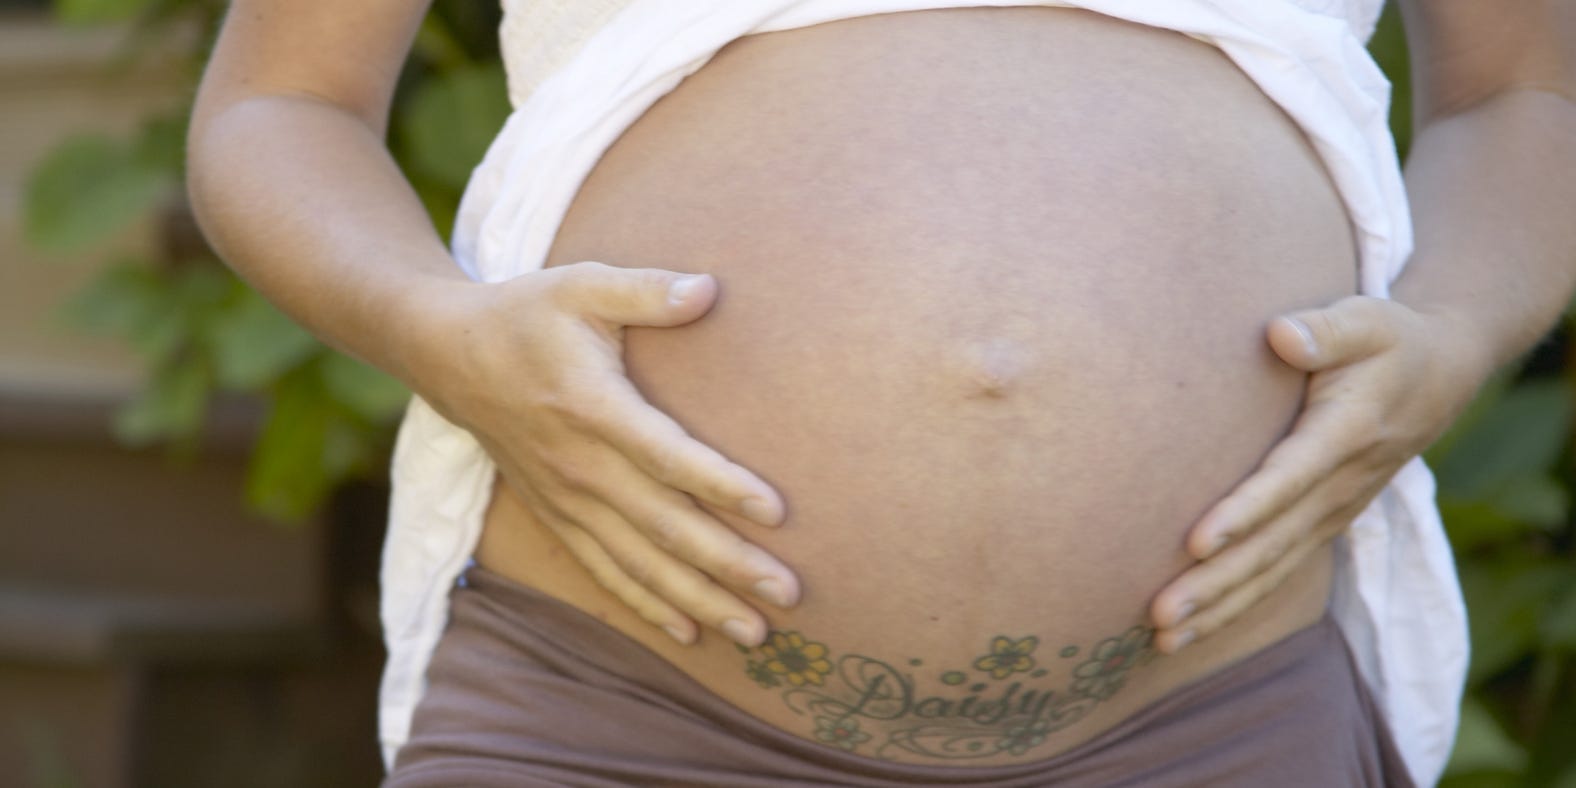 Why You Should Reconsider Getting A Tattoo While Pregnant